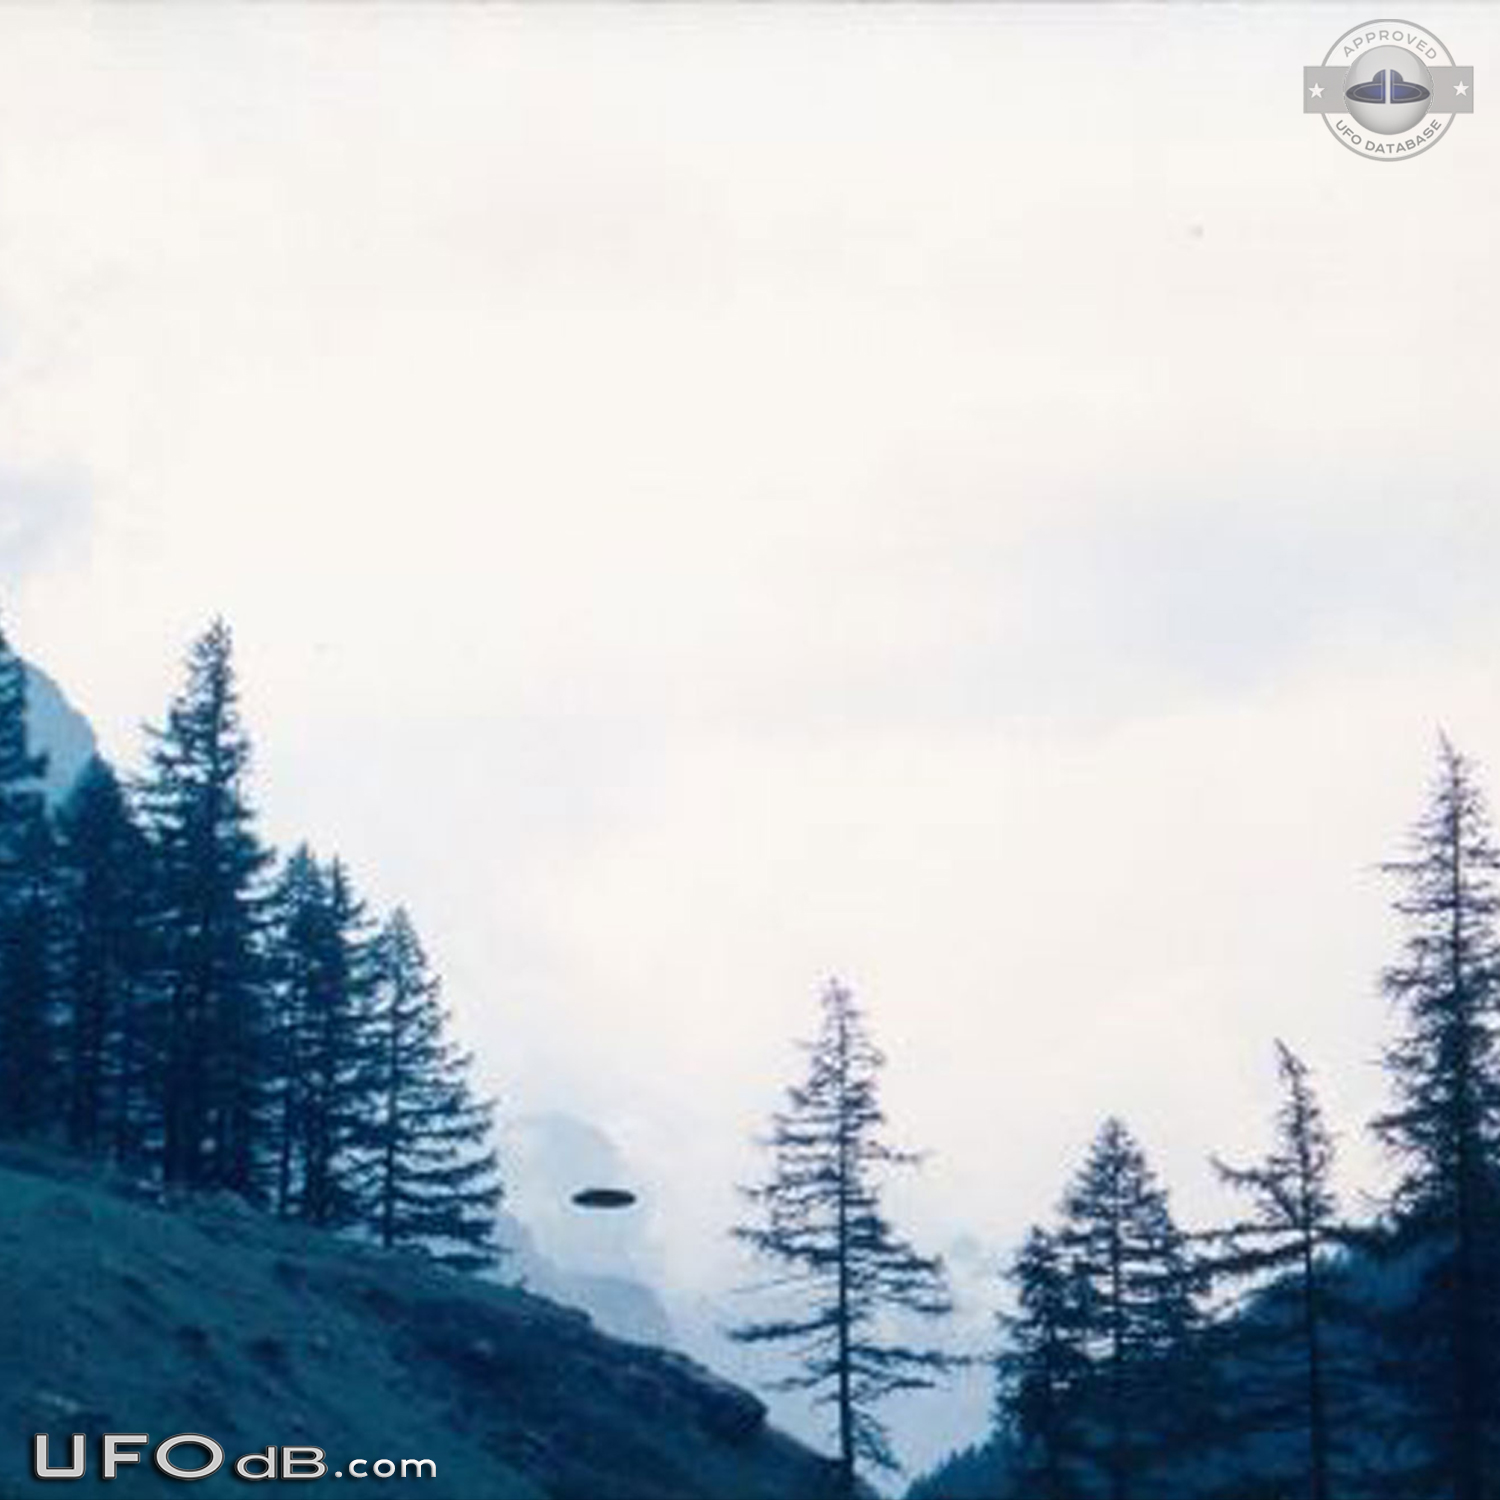 One of the Best UFO sighting backed by 2 UFO pictures Switzerland 1975 UFO Picture #459-2